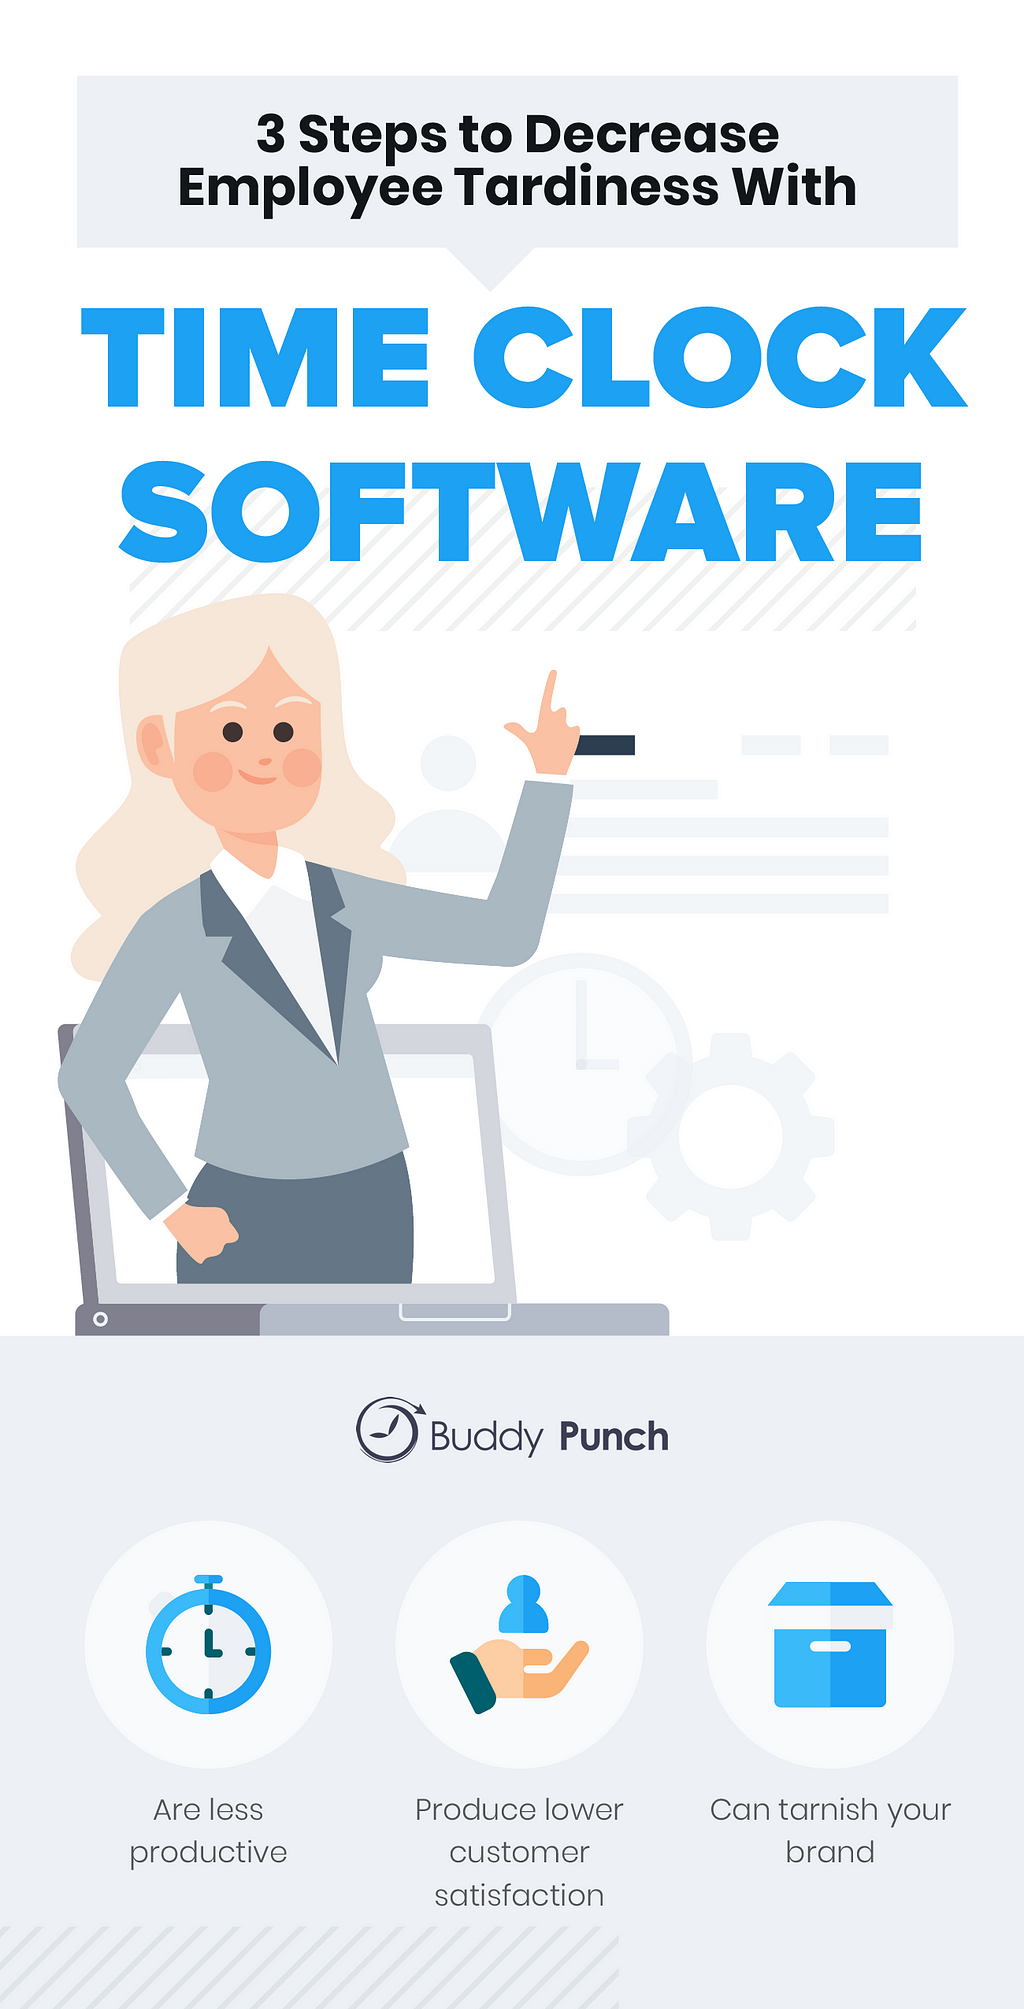 Buddy Punch: 3 Steps to Decrease Employee Tardiness With TIME CLOCK SOFTWARE